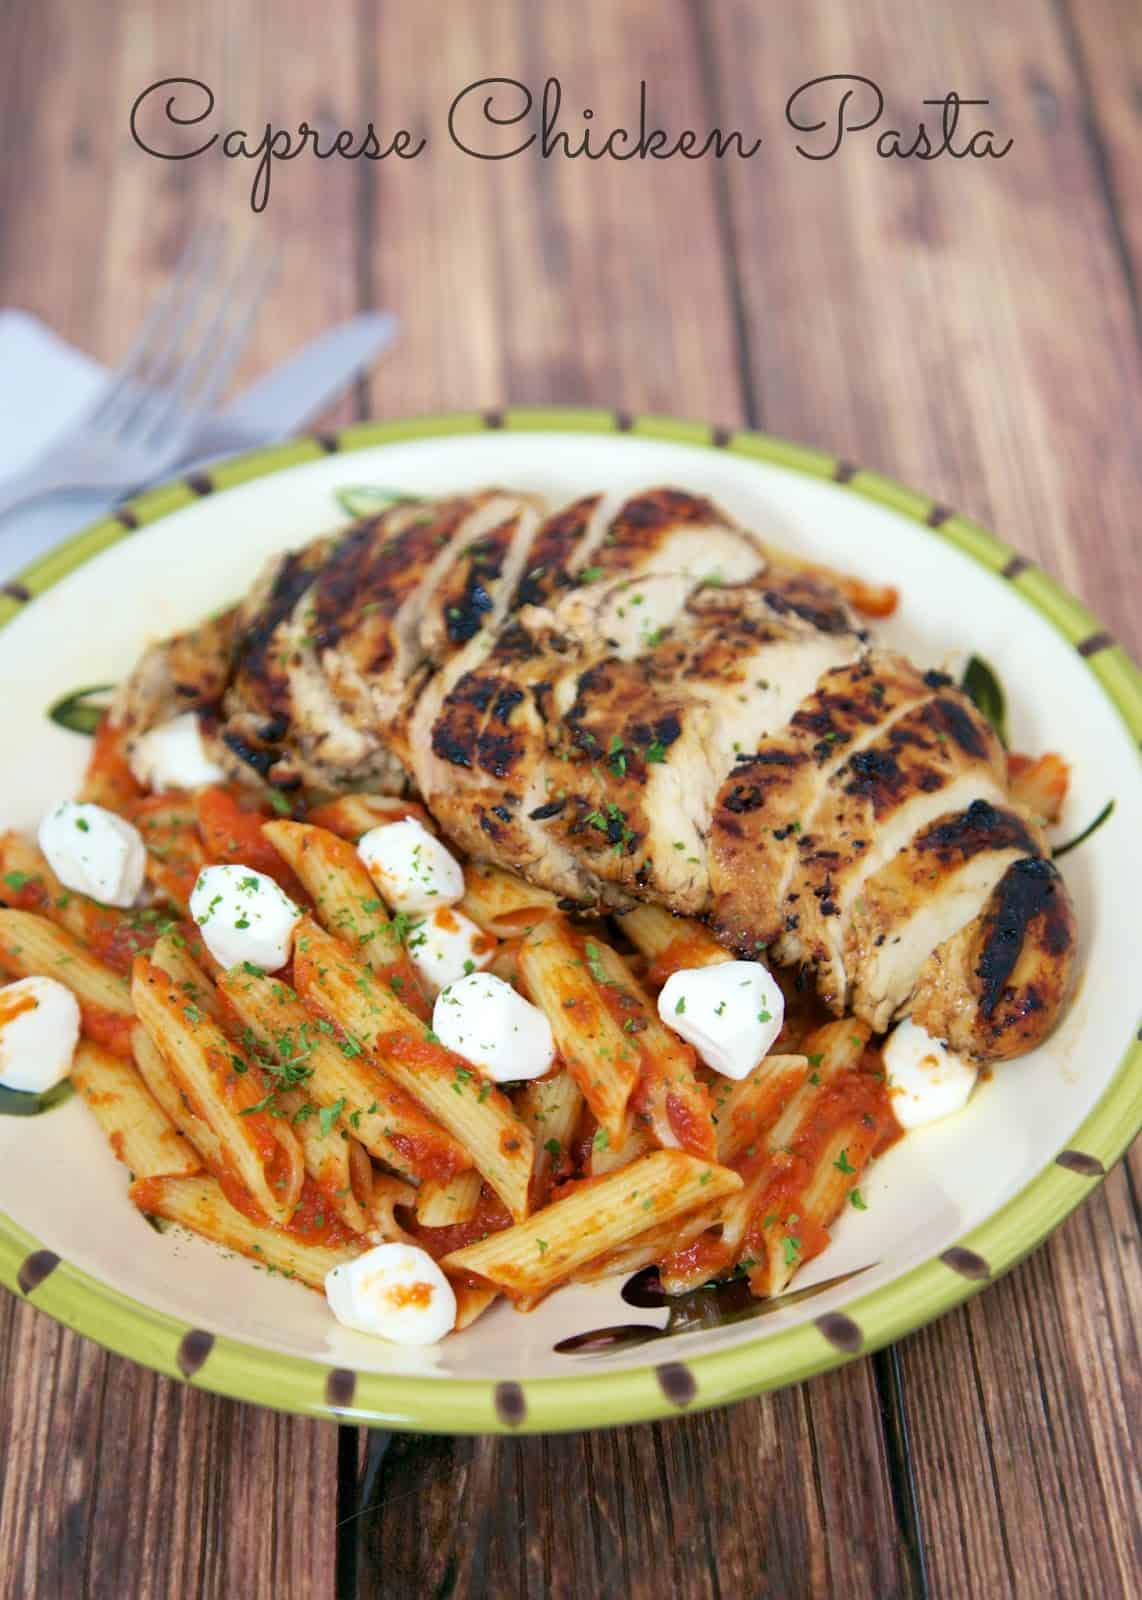 Grilled Chicken Caprese Pasta - balsamic marinated chicken over pasta and fresh mozzarella - all the flavors of your favorite salad in a pasta dish!